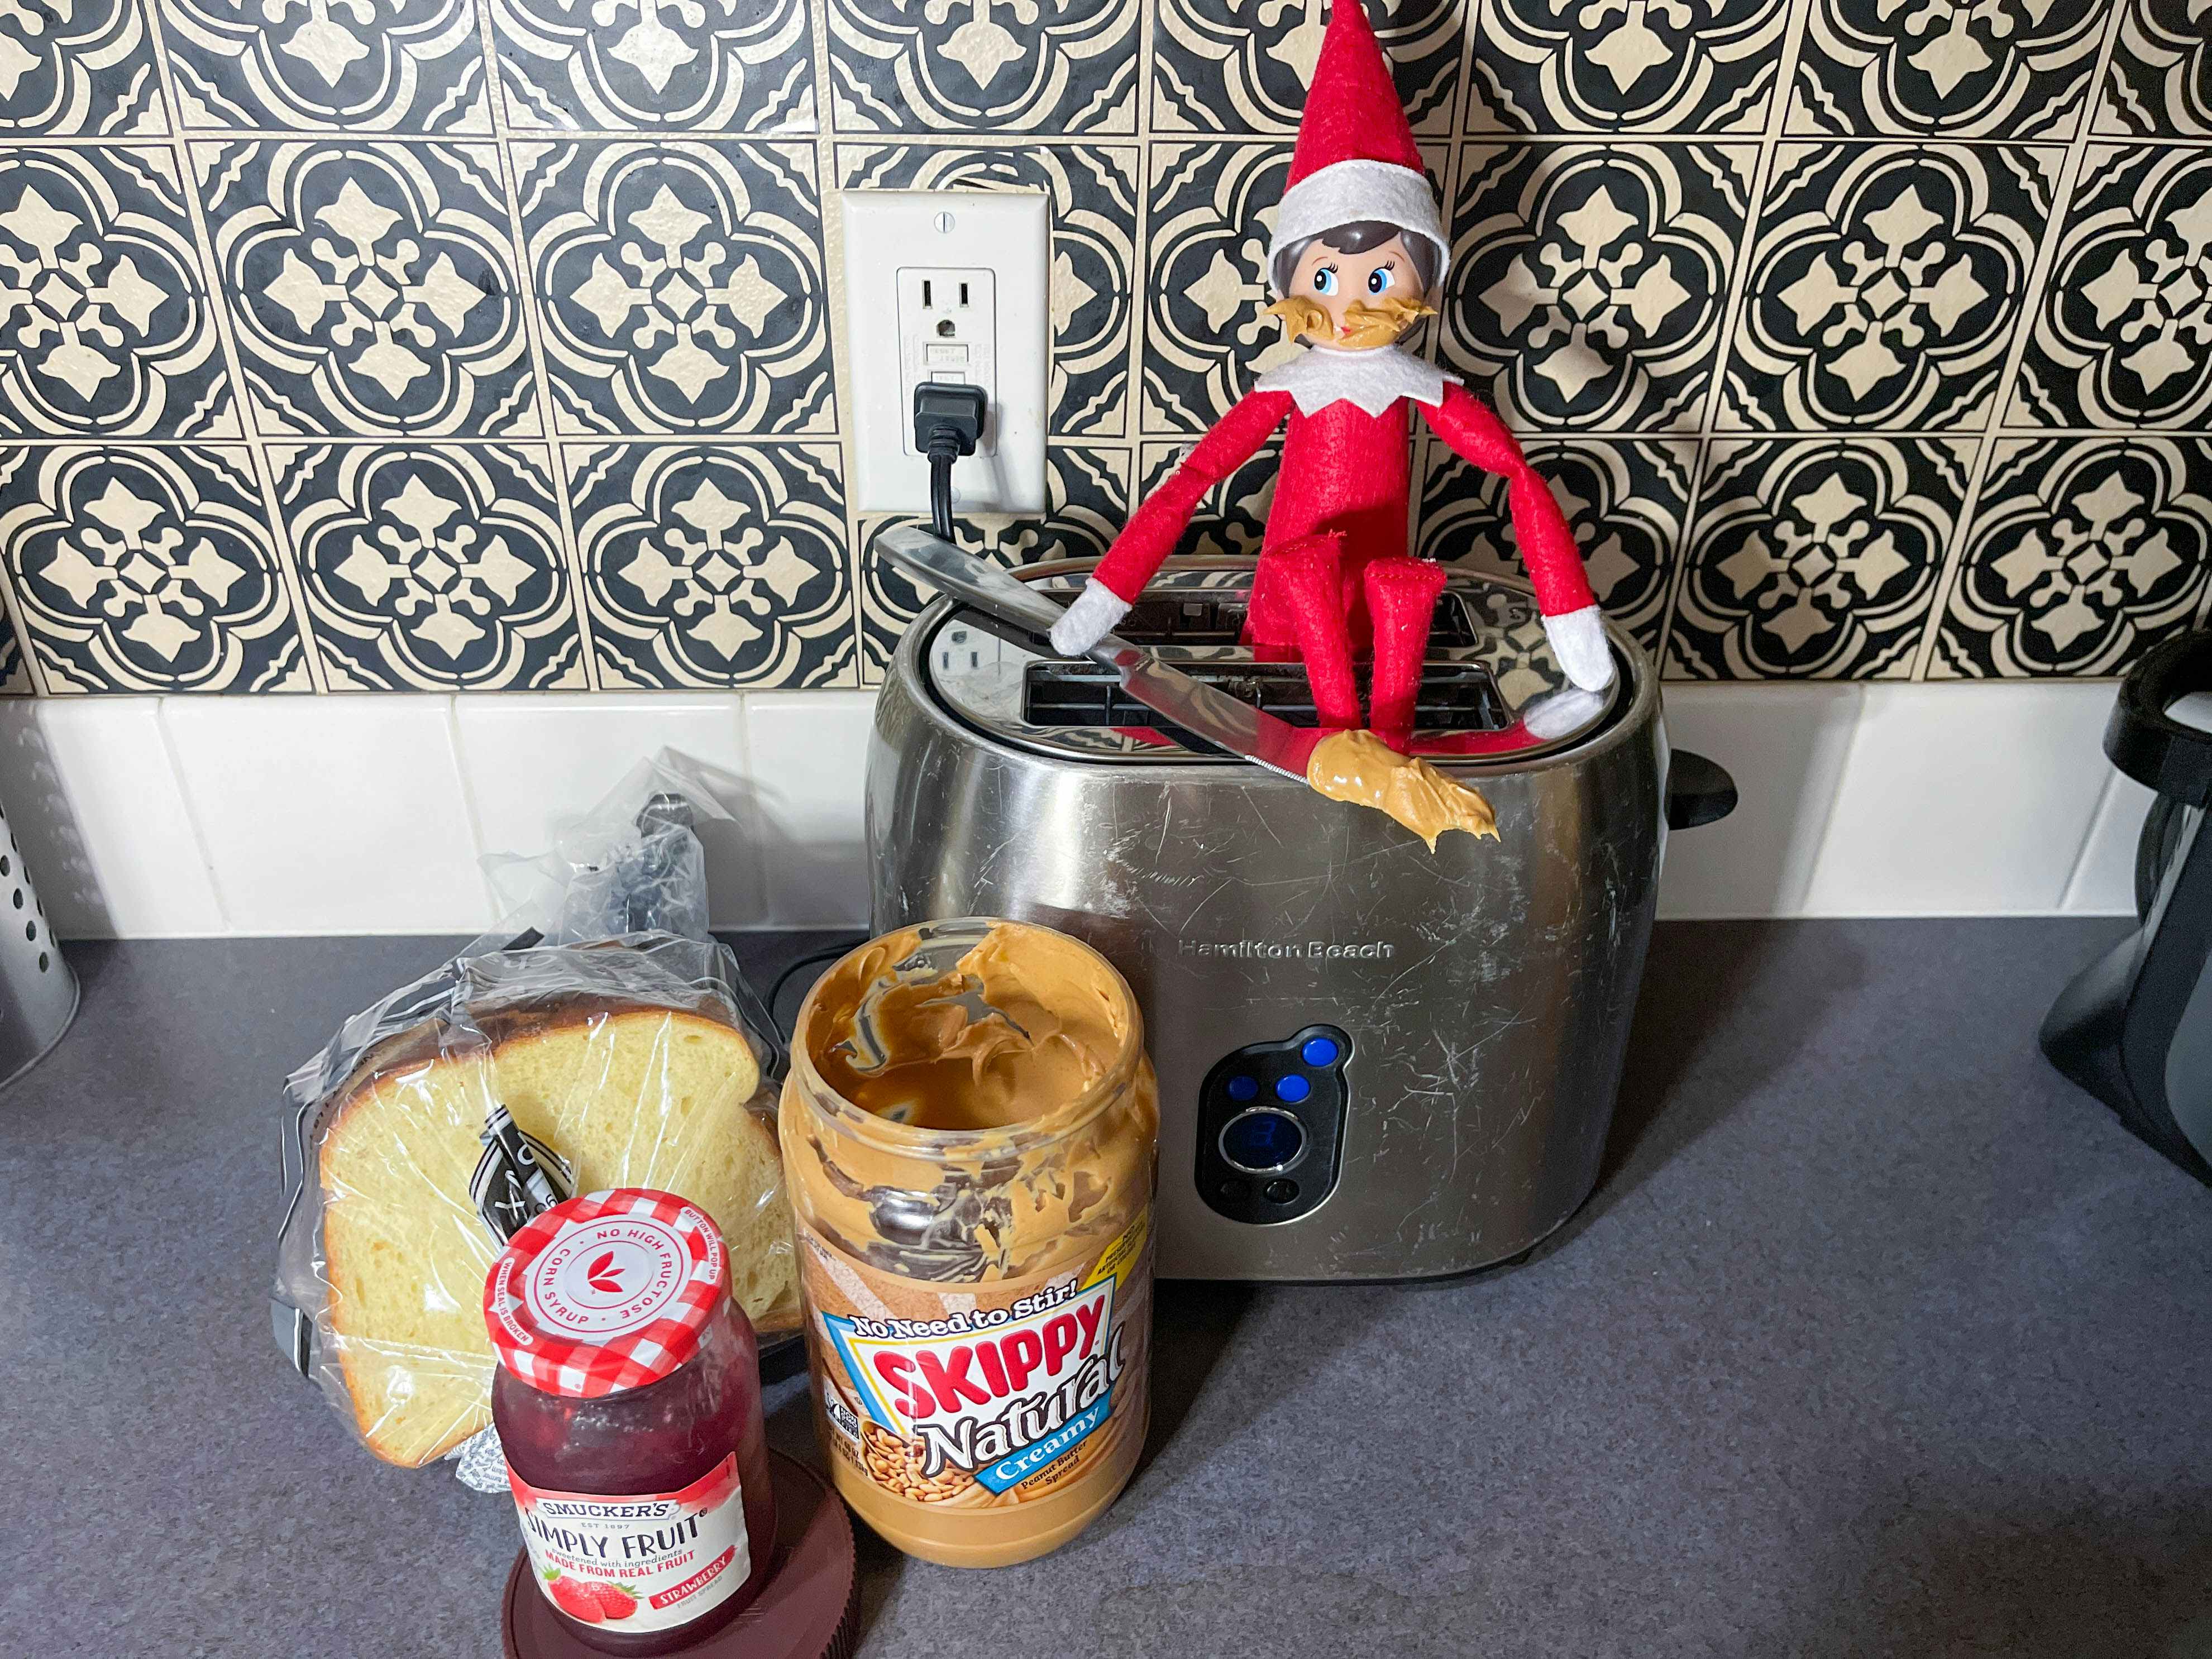 an elf on the shelf doll sitting on a toaster with a knife loaded with peanut butter and peanut butter on its face with bread, jam, and jar of peanut butter next to the toaster 